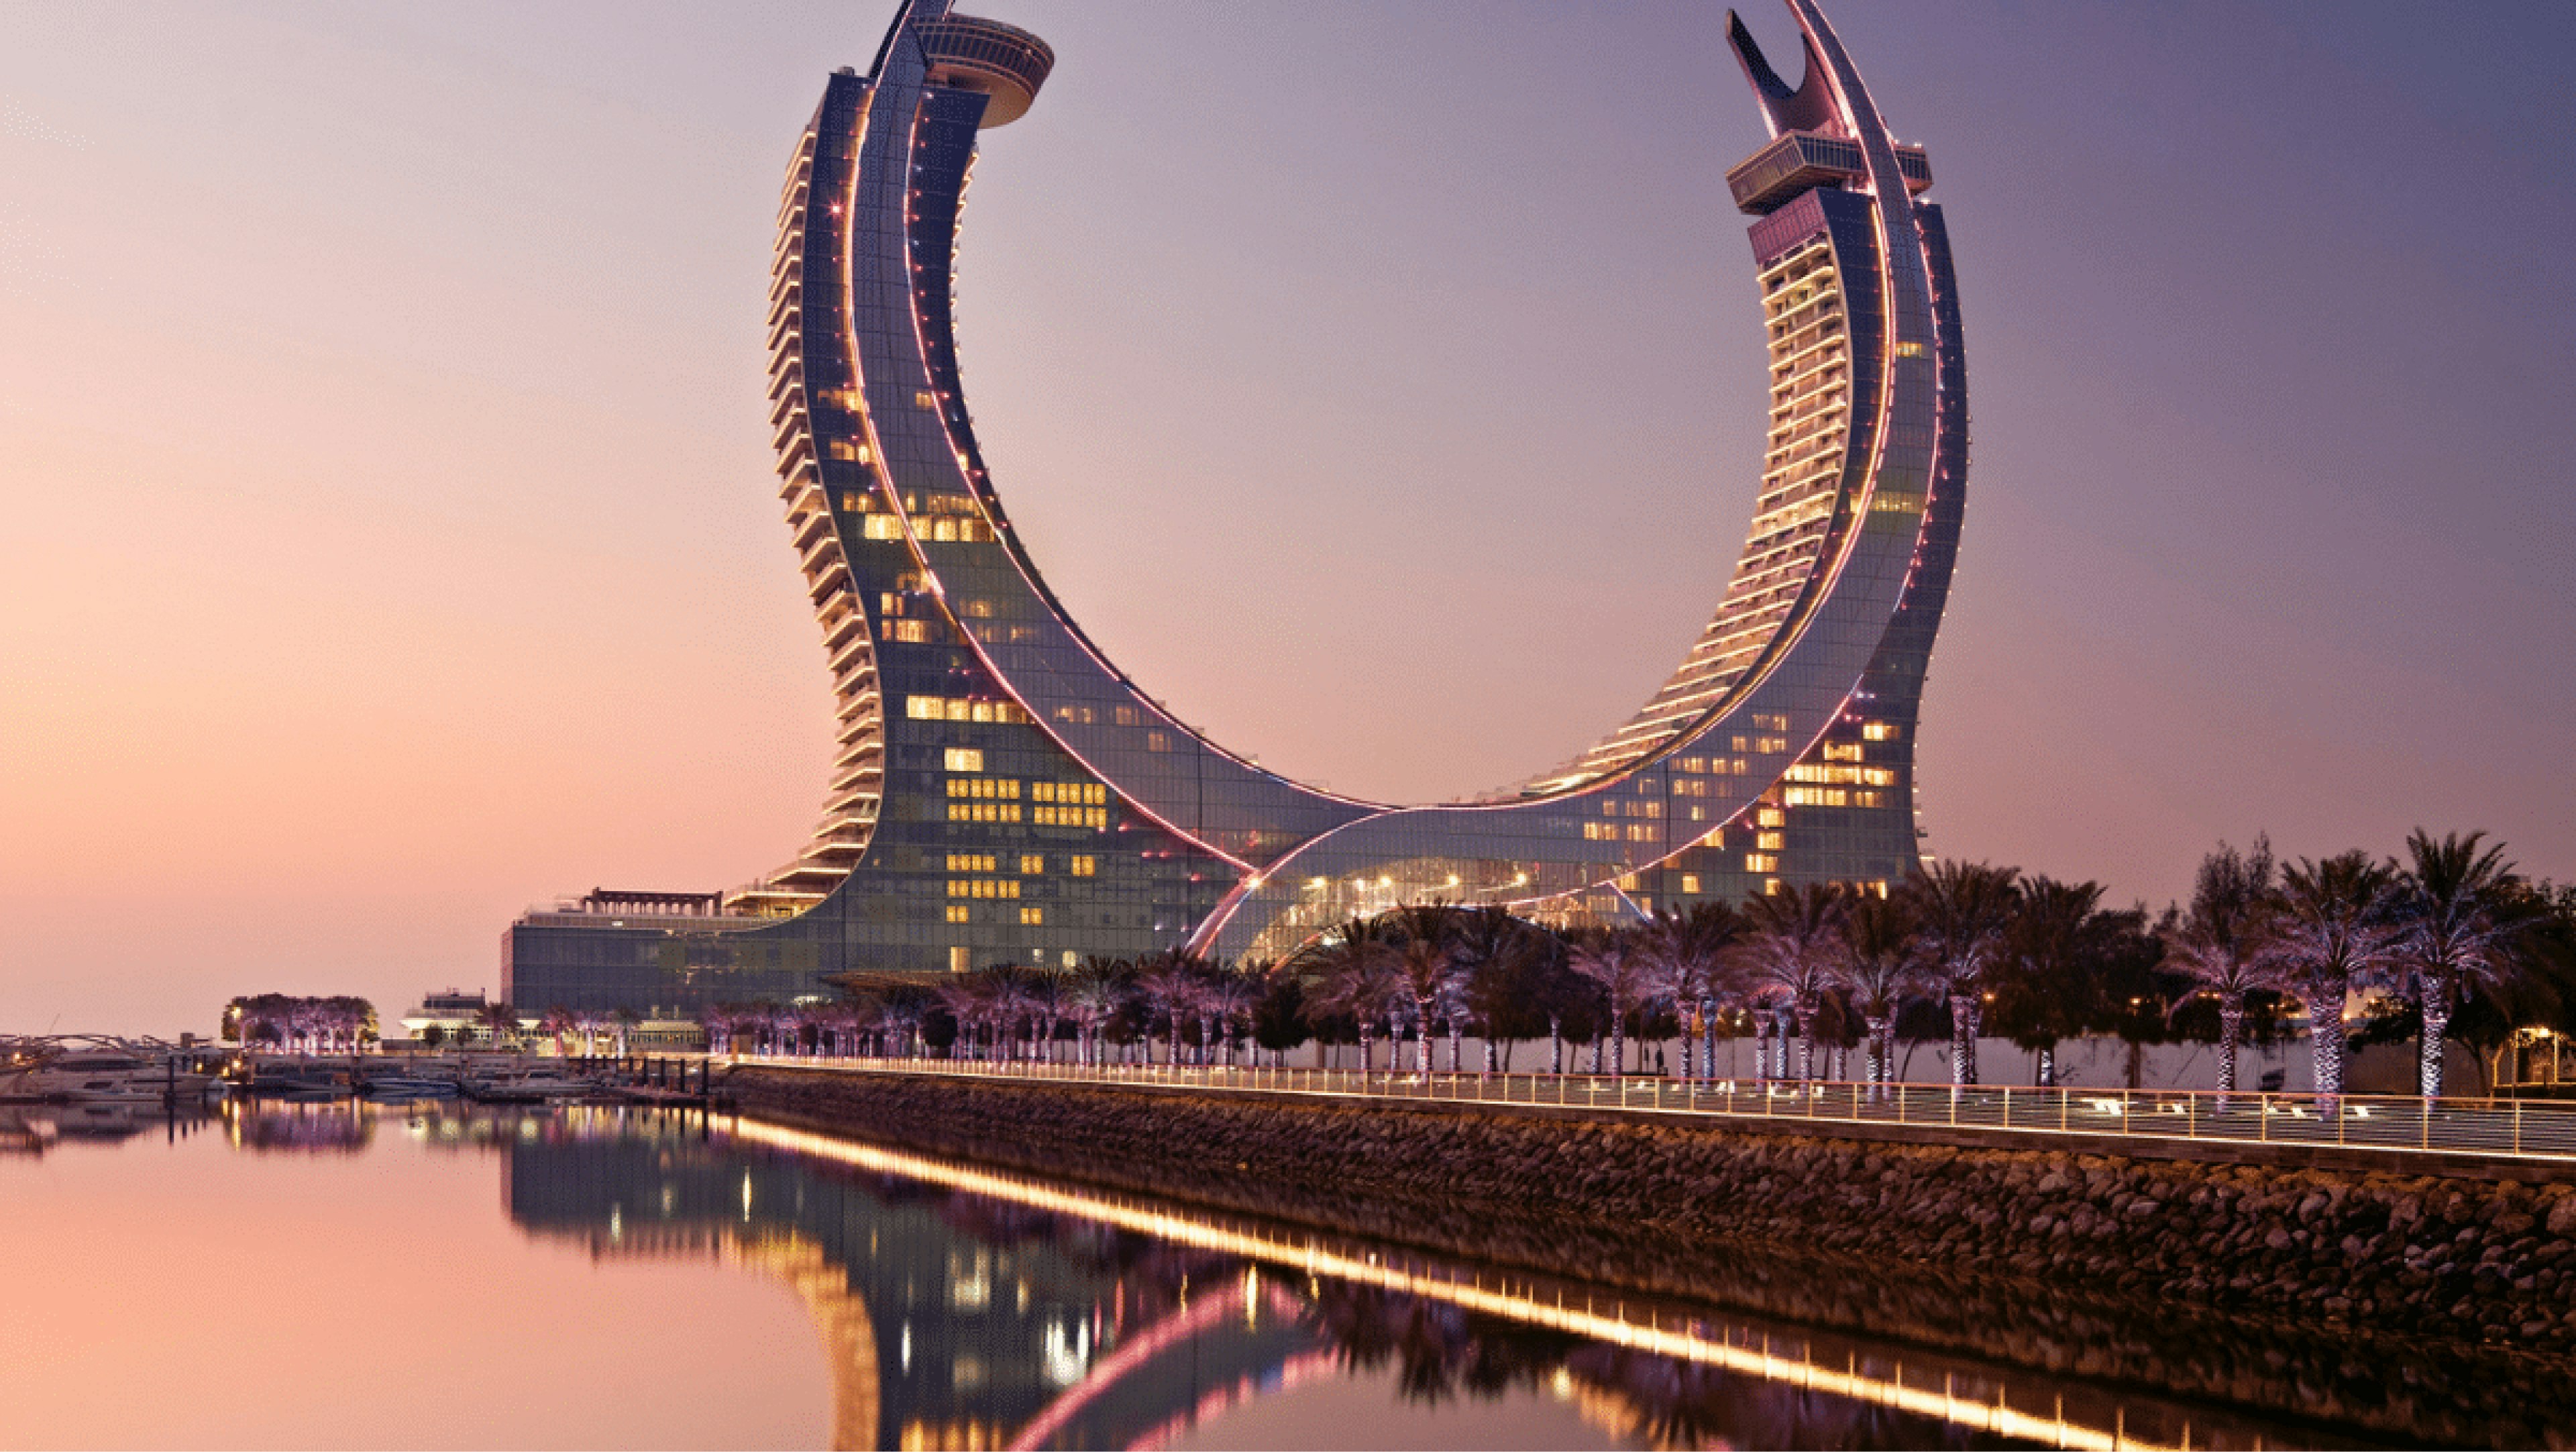 Katara Towers comprise of two hotels: Fairmont and Raffles.